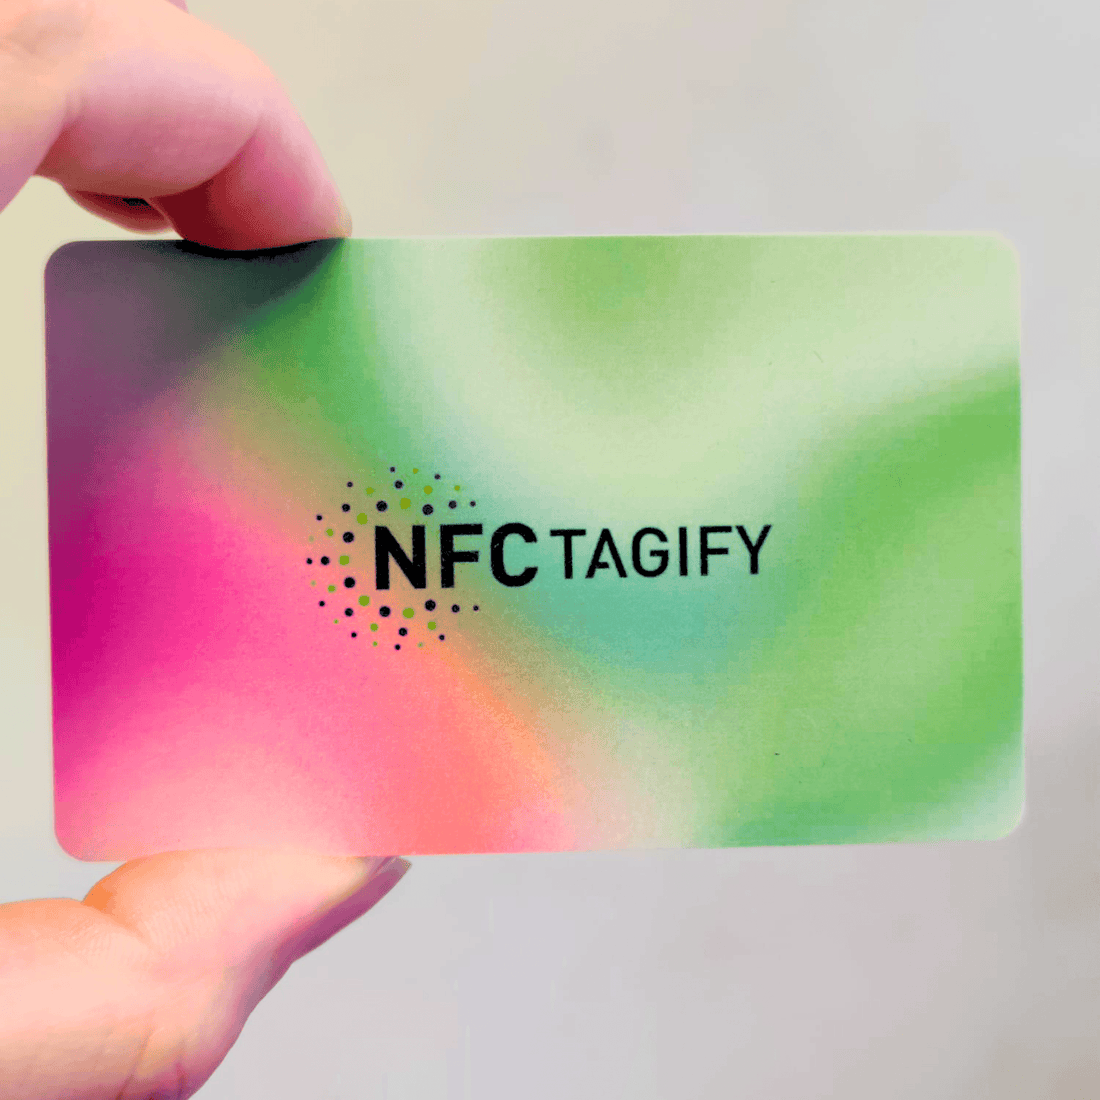 We Offer the Best NFC Digital Business Cards in the UK - NFC Tagify